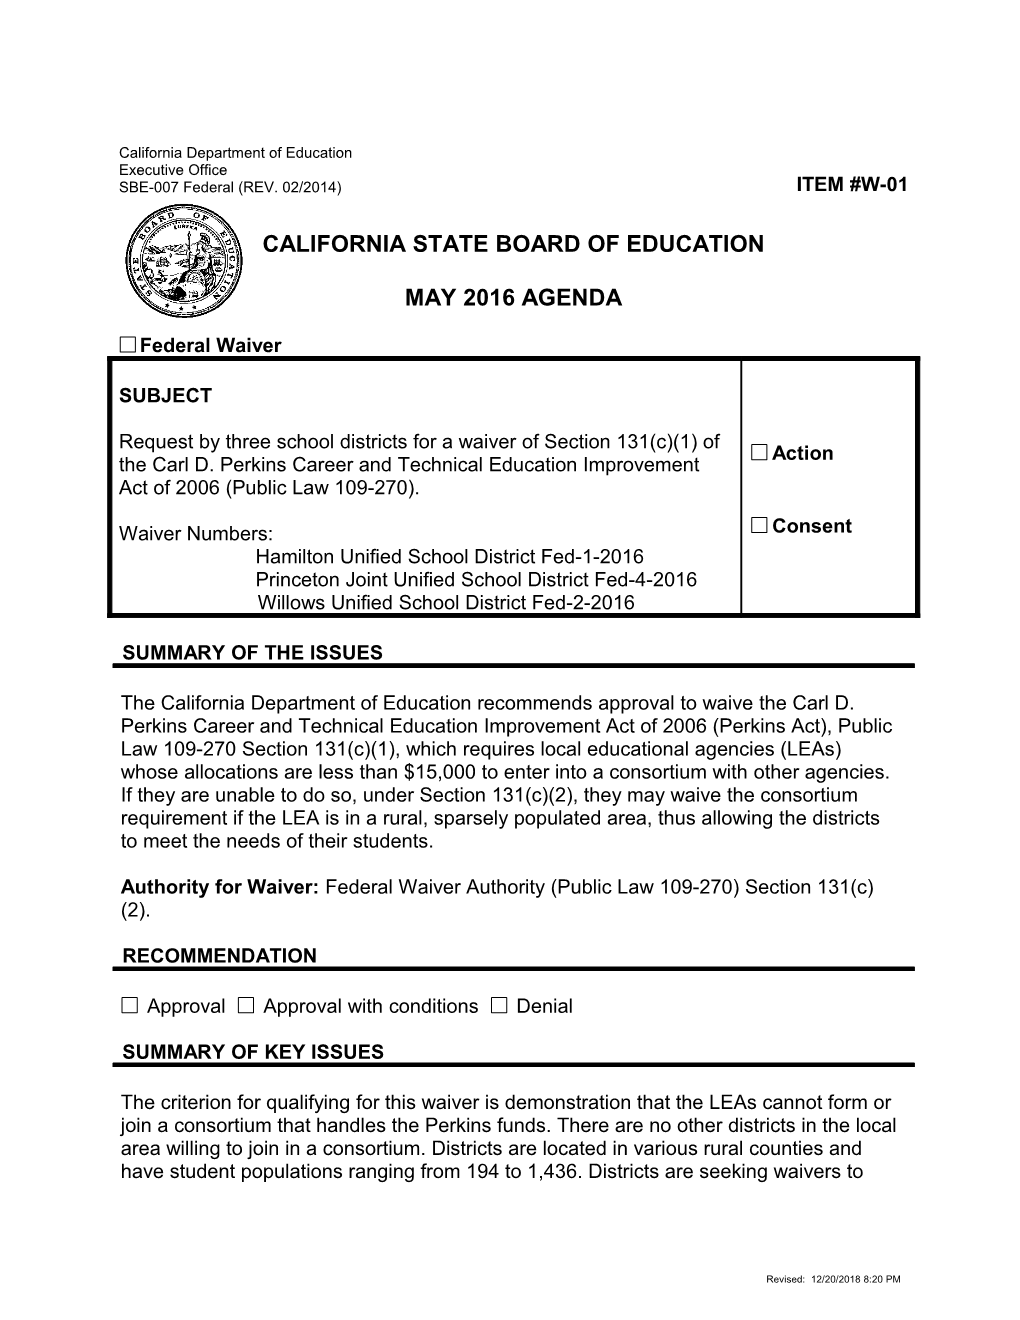 May 2016 Waiver Item W-01 - Meeting Agendas (CA State Board of Education)